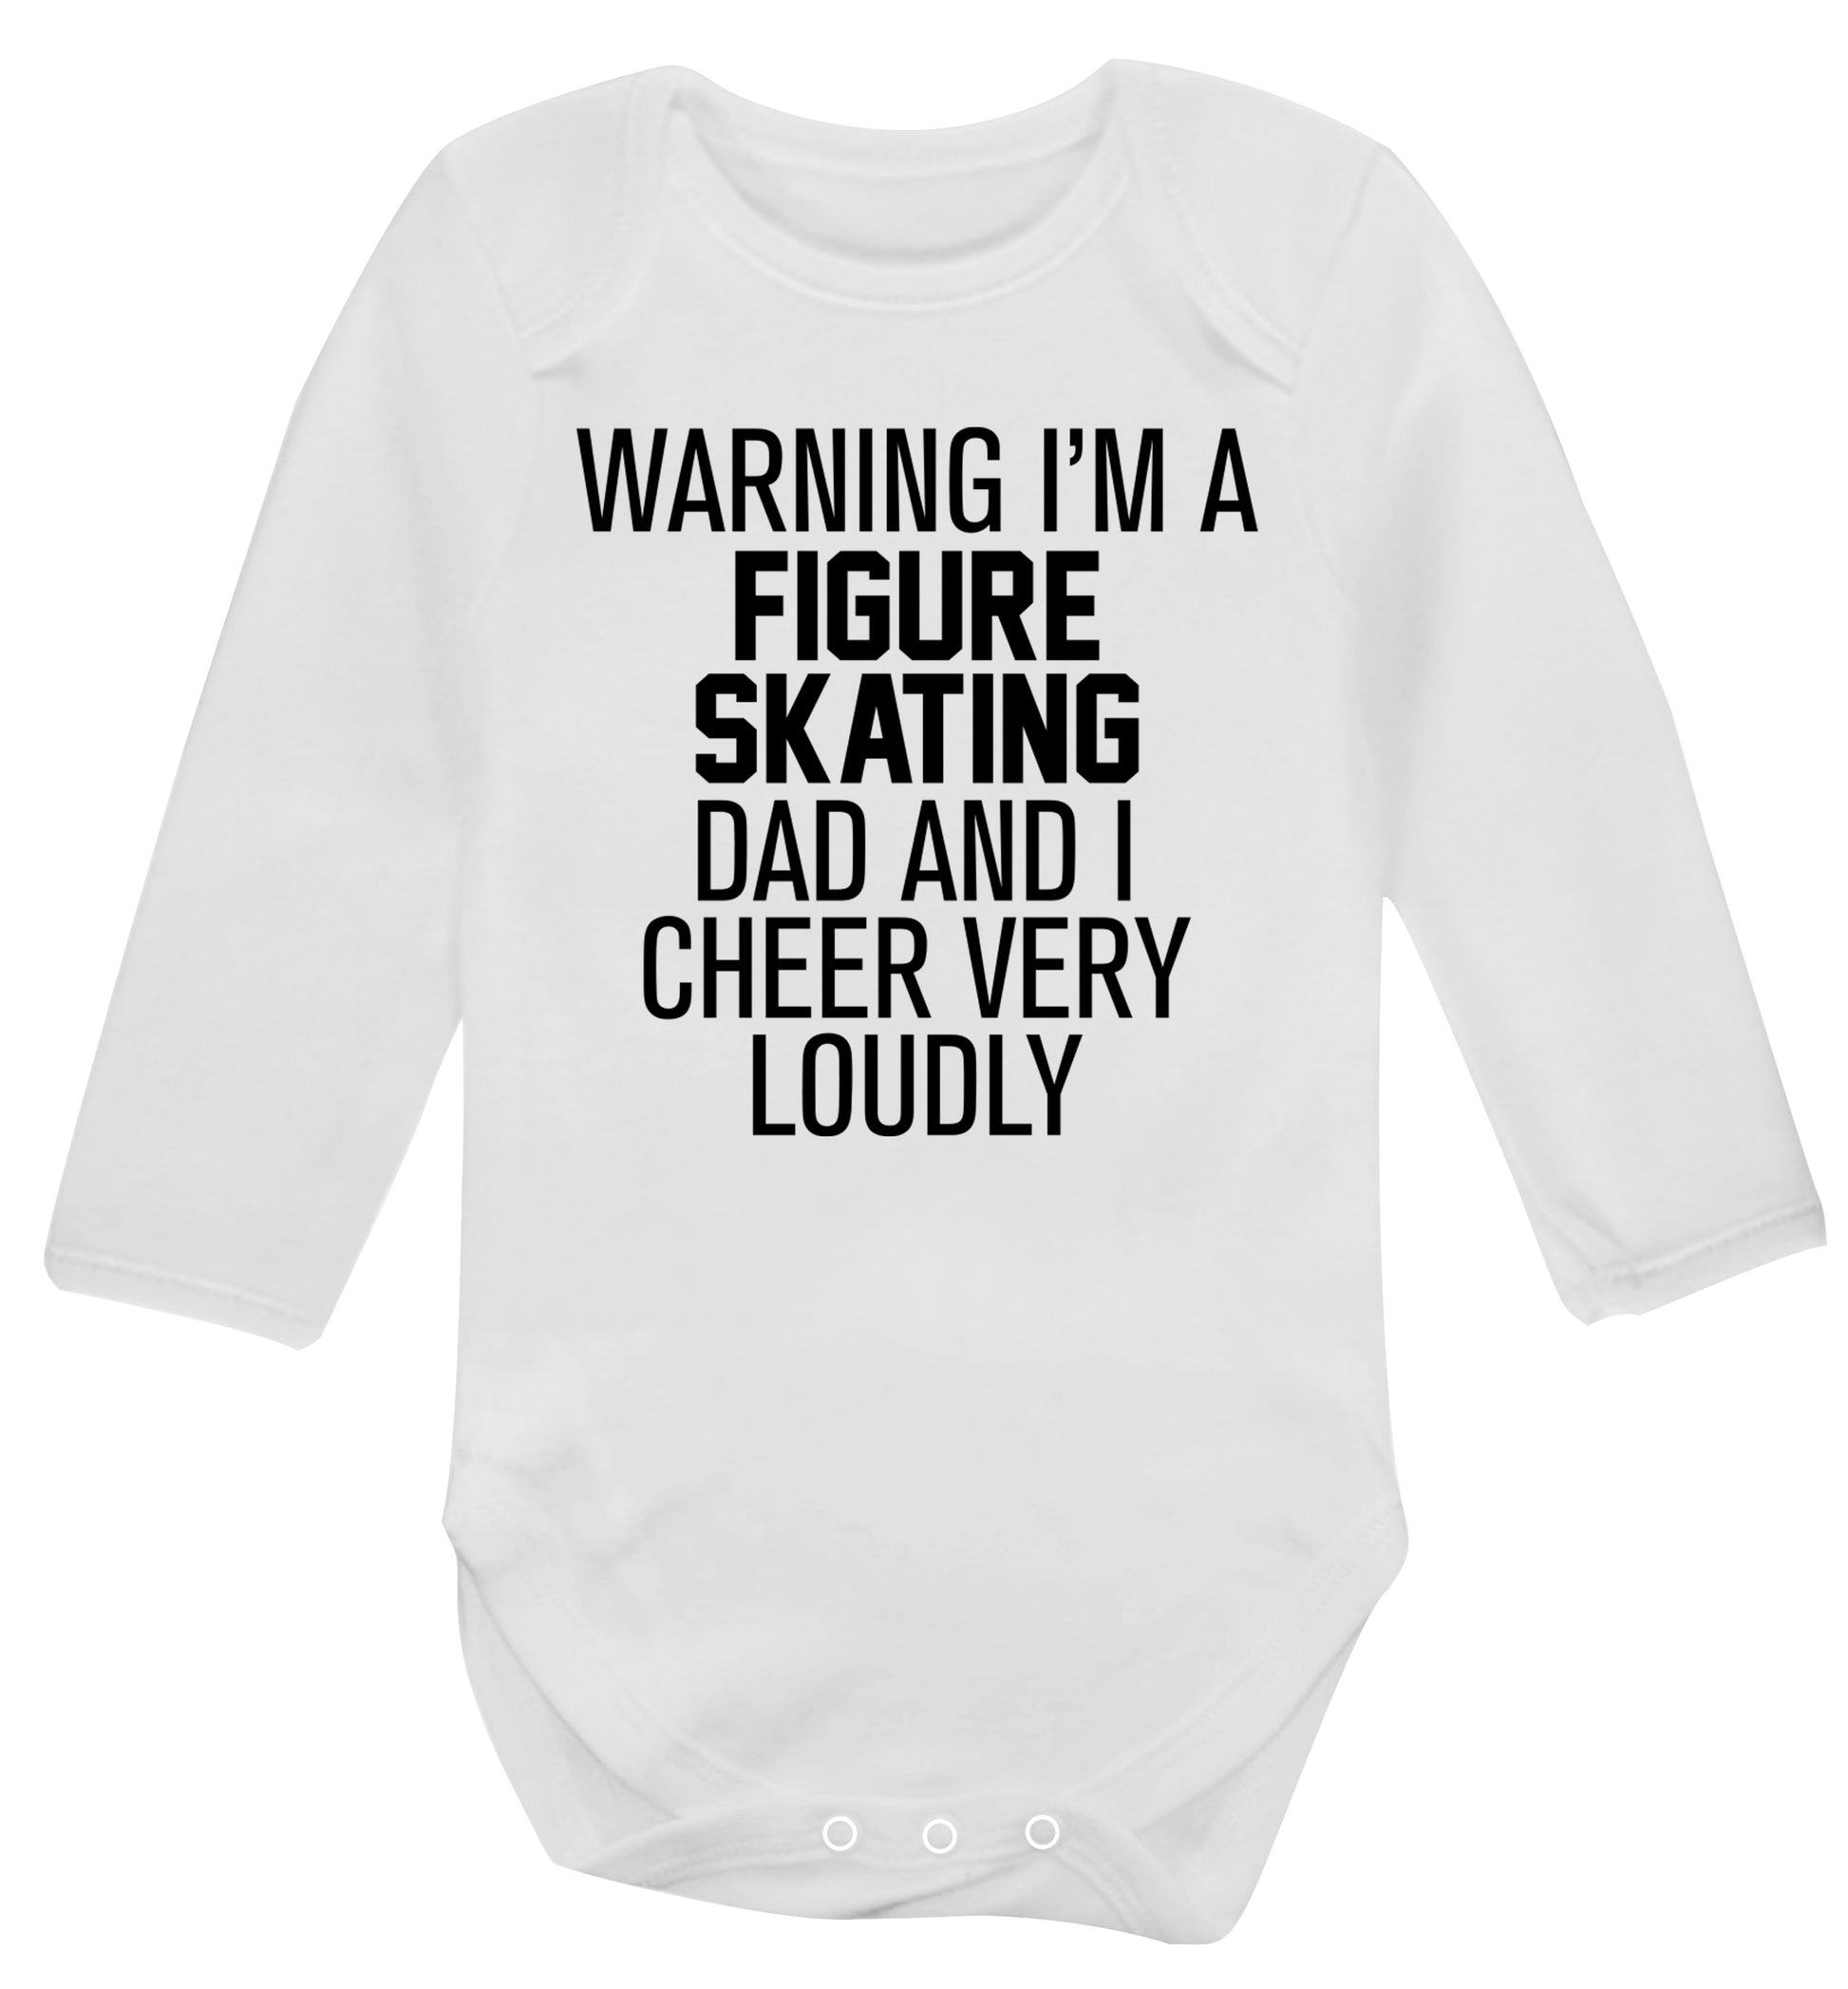 Warning I'm a figure skating dad and I cheer very loudly Baby Vest long sleeved white 6-12 months